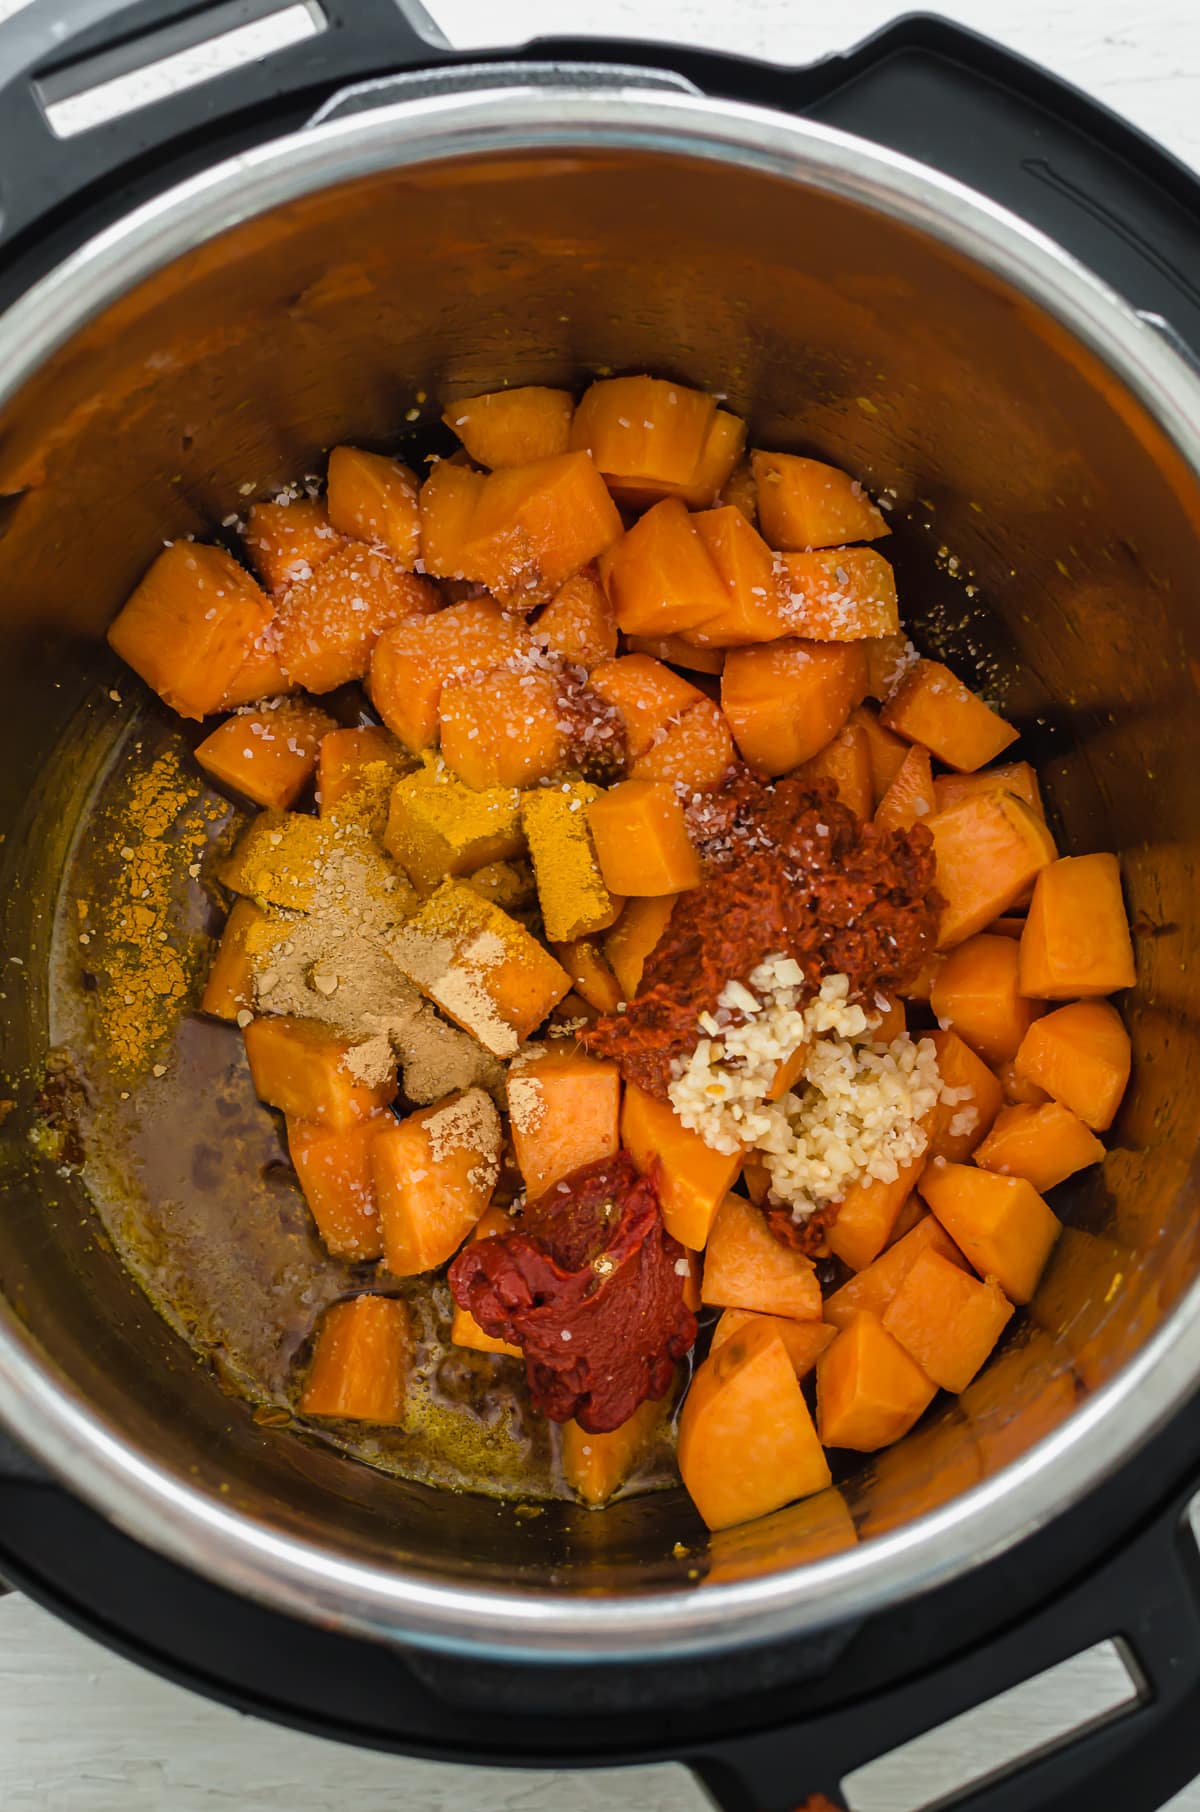 Spices and curry paste being stirred into sauteed sweet potatoes for lentil curry.